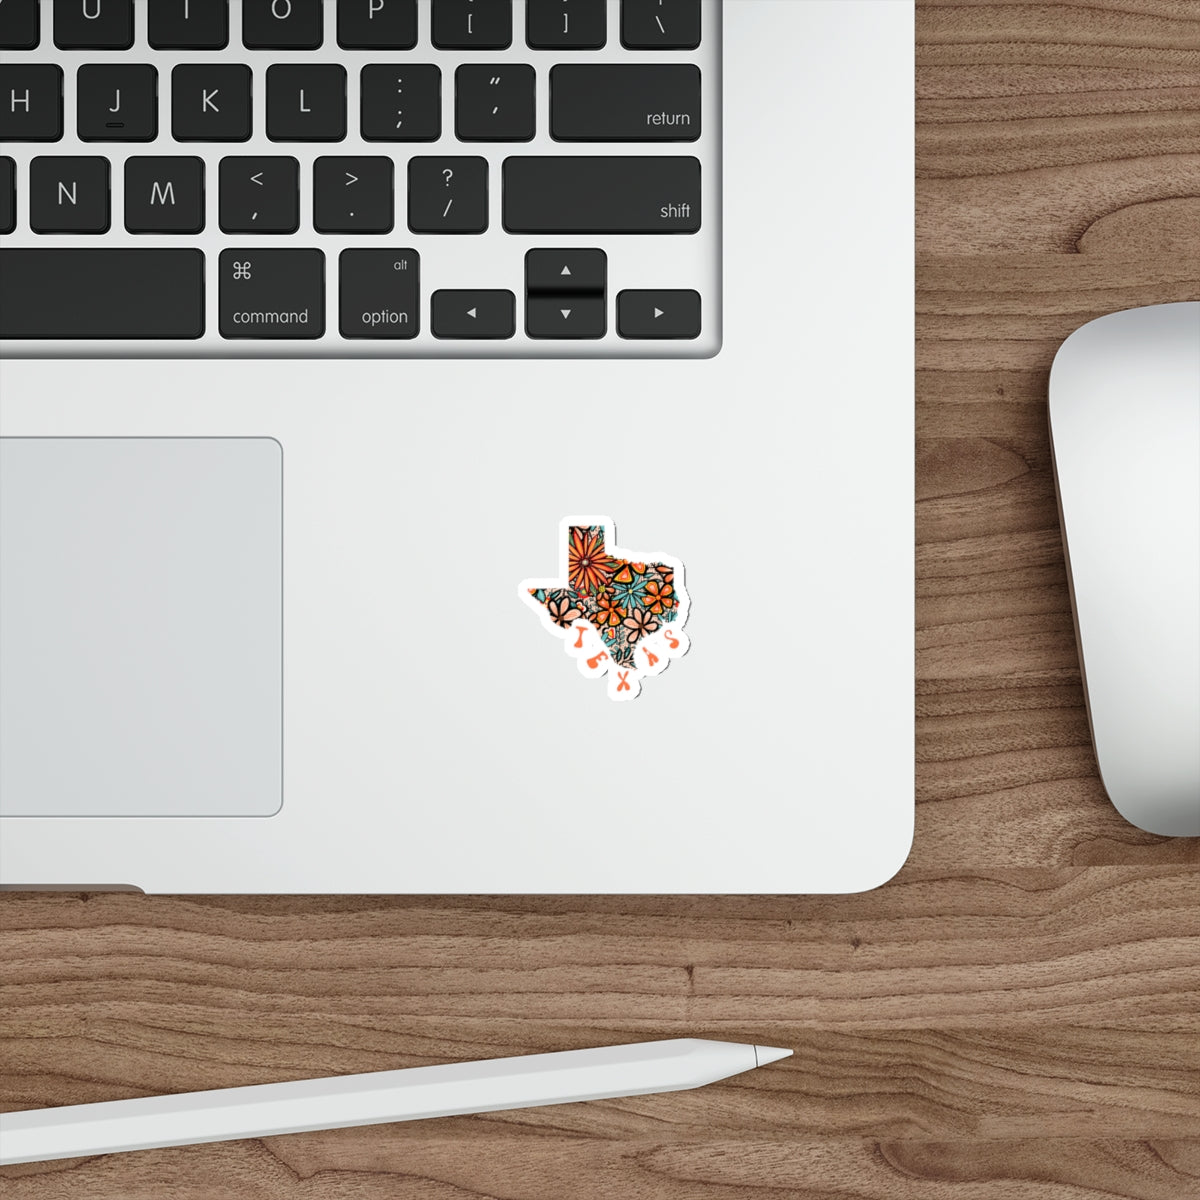 Texas State Sticker | Vinyl Artist Designed Illustration Featuring Texas State Filled With Retro Flowers with Retro Hand-Lettering Die-Cut Stickers